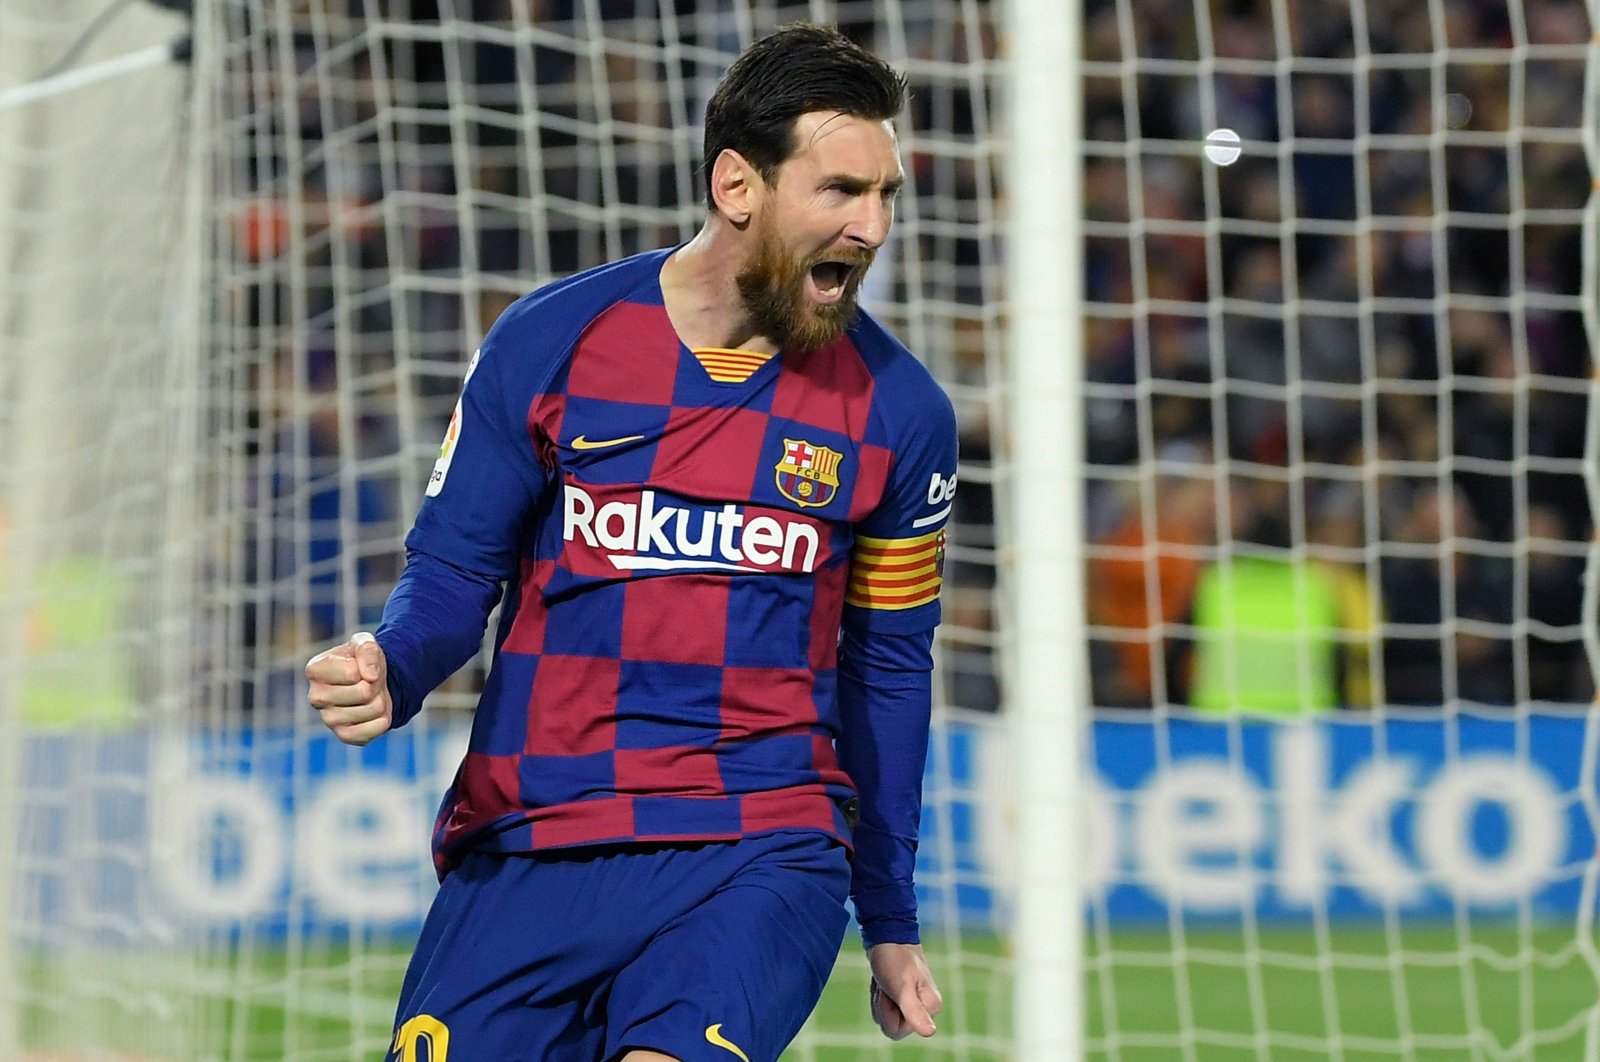 Barcelona's Argentine forward Lionel Messi celebrates after scoring a goal during the Spanish league football match between FC Barcelona and Real Sociedad at the Camp Nou stadium in Barcelona, Spain on March 7, 2020. (AFP Photo)